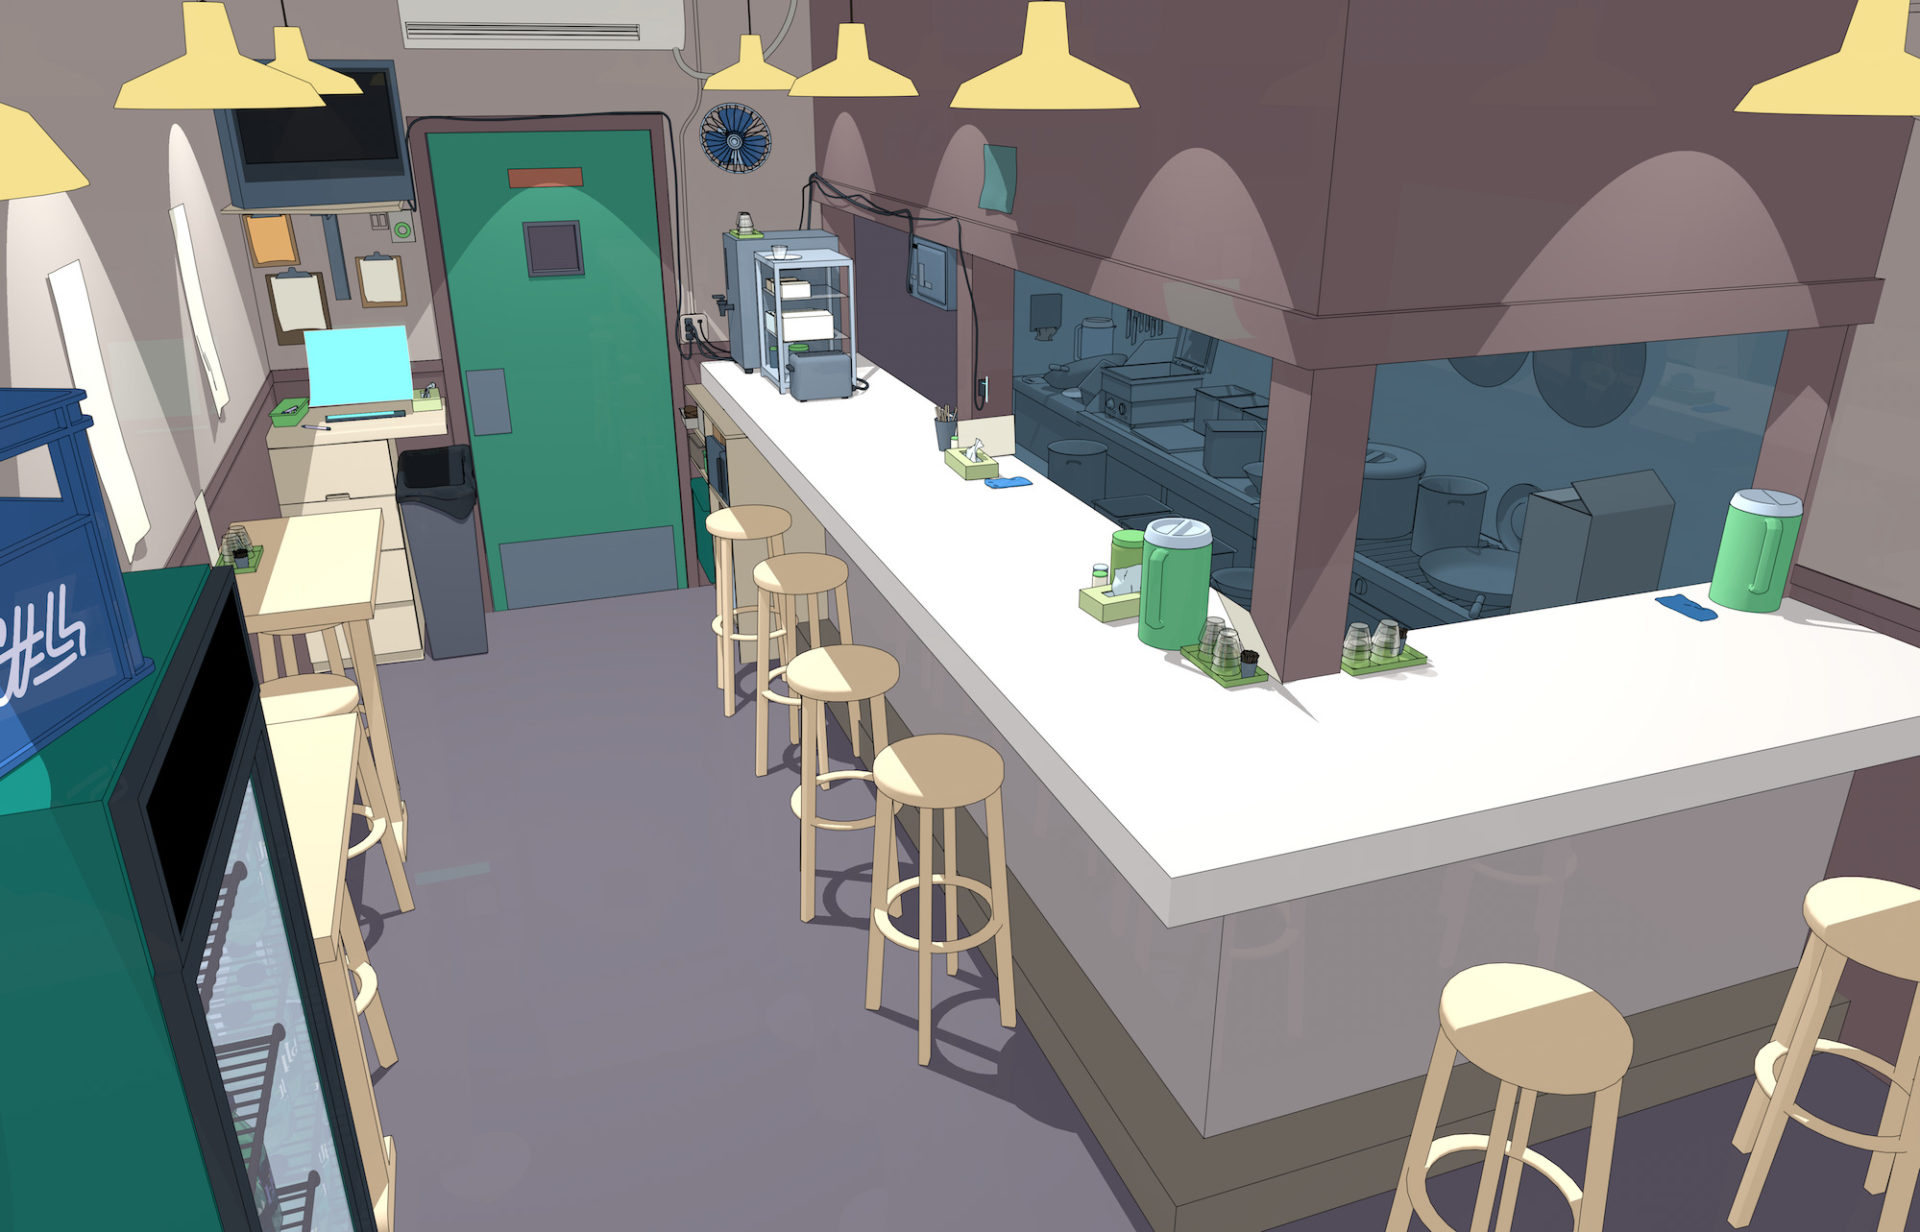 noodle shop digital drawing by Matt Wiley. On the right is an L shaped white bar with yellow barstools and yellow overhead lights. on the back wall is a green door. 